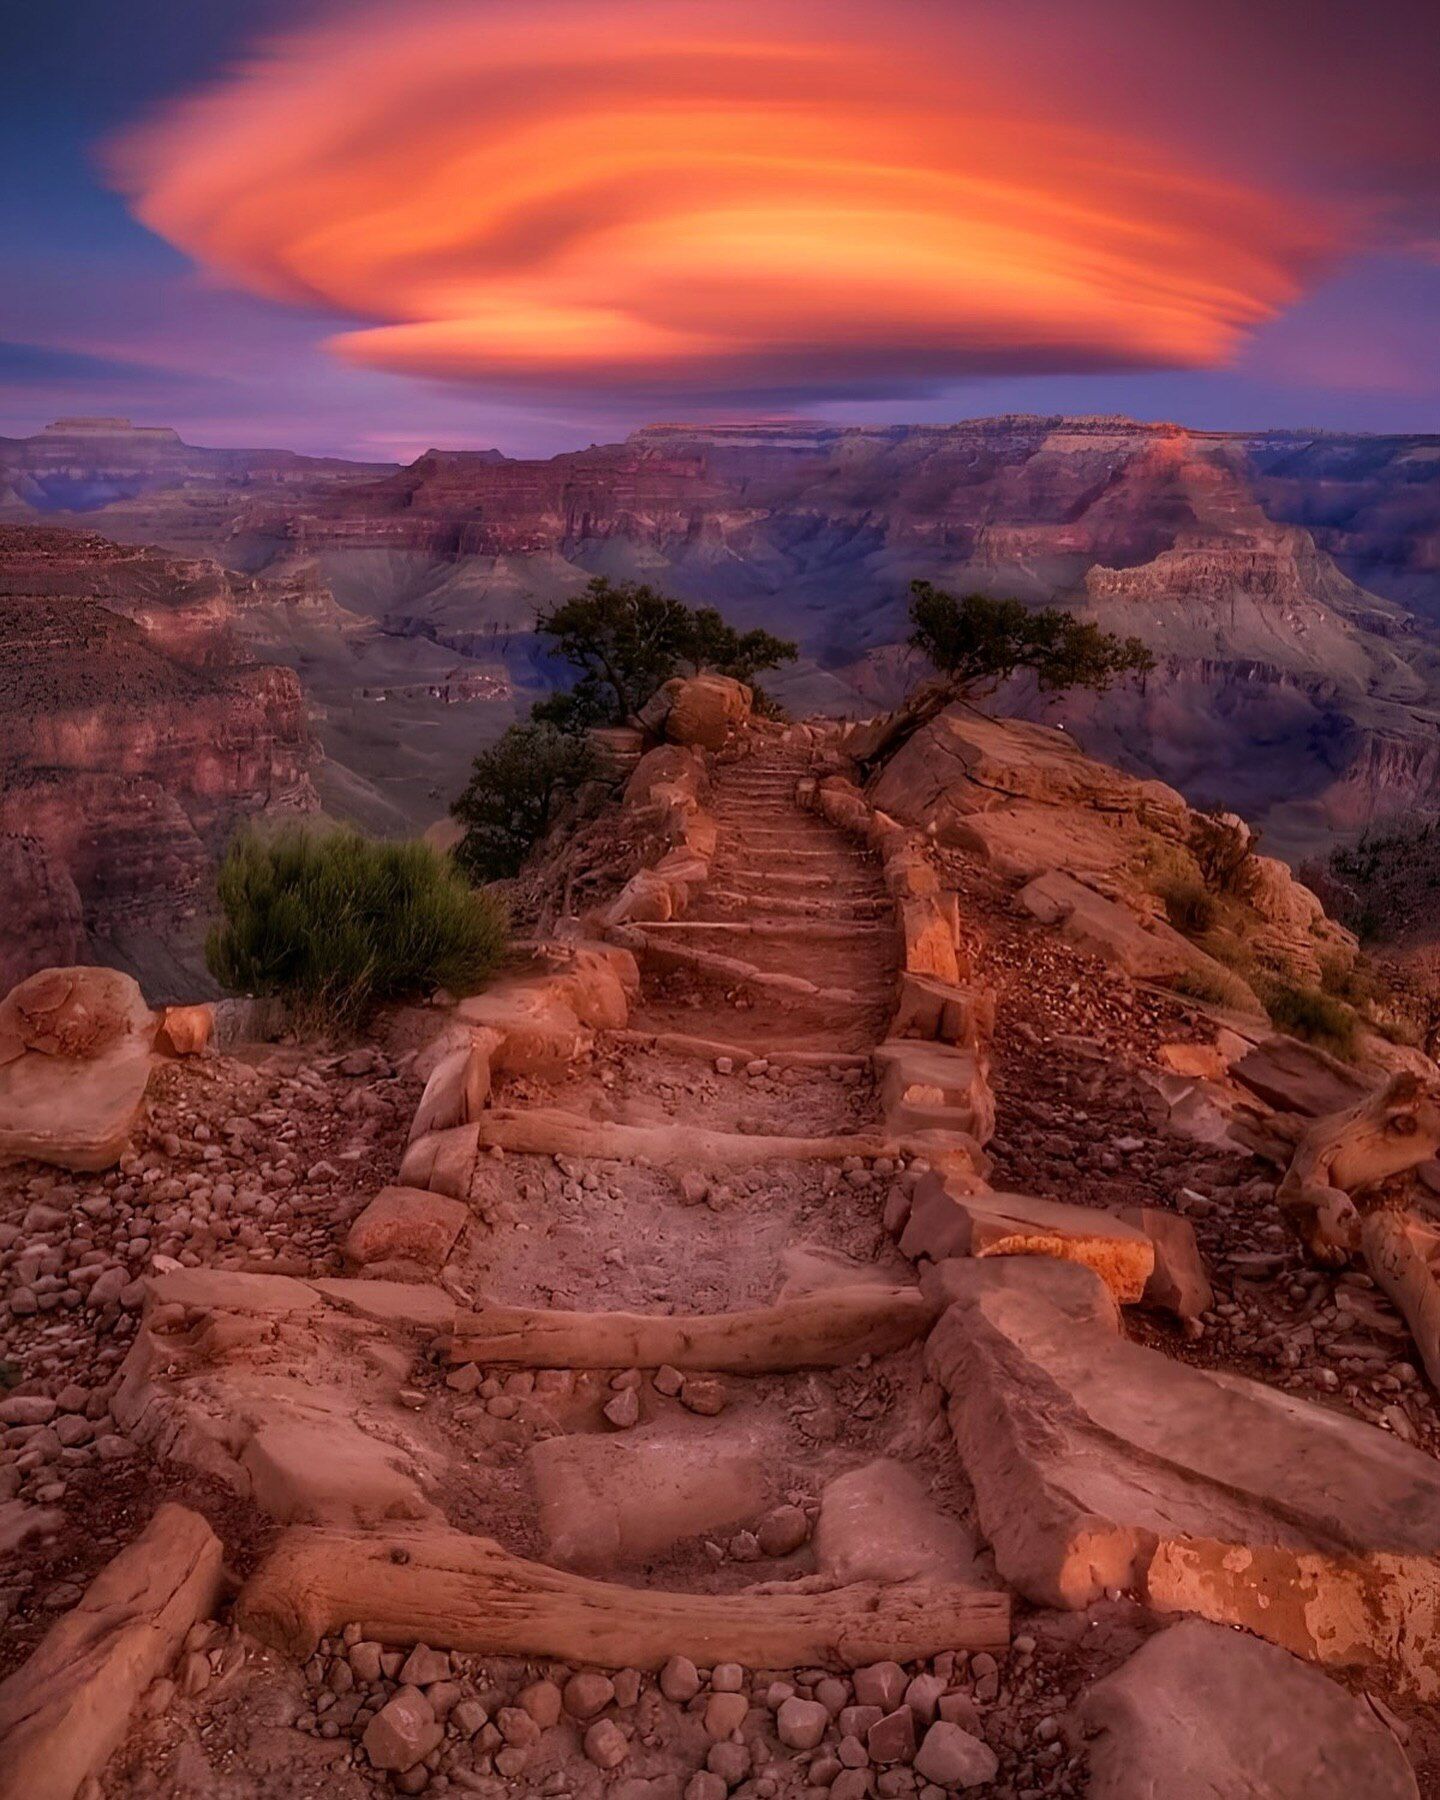 Adventures in the heart of Arizona: the breathtaking Grand Canyon